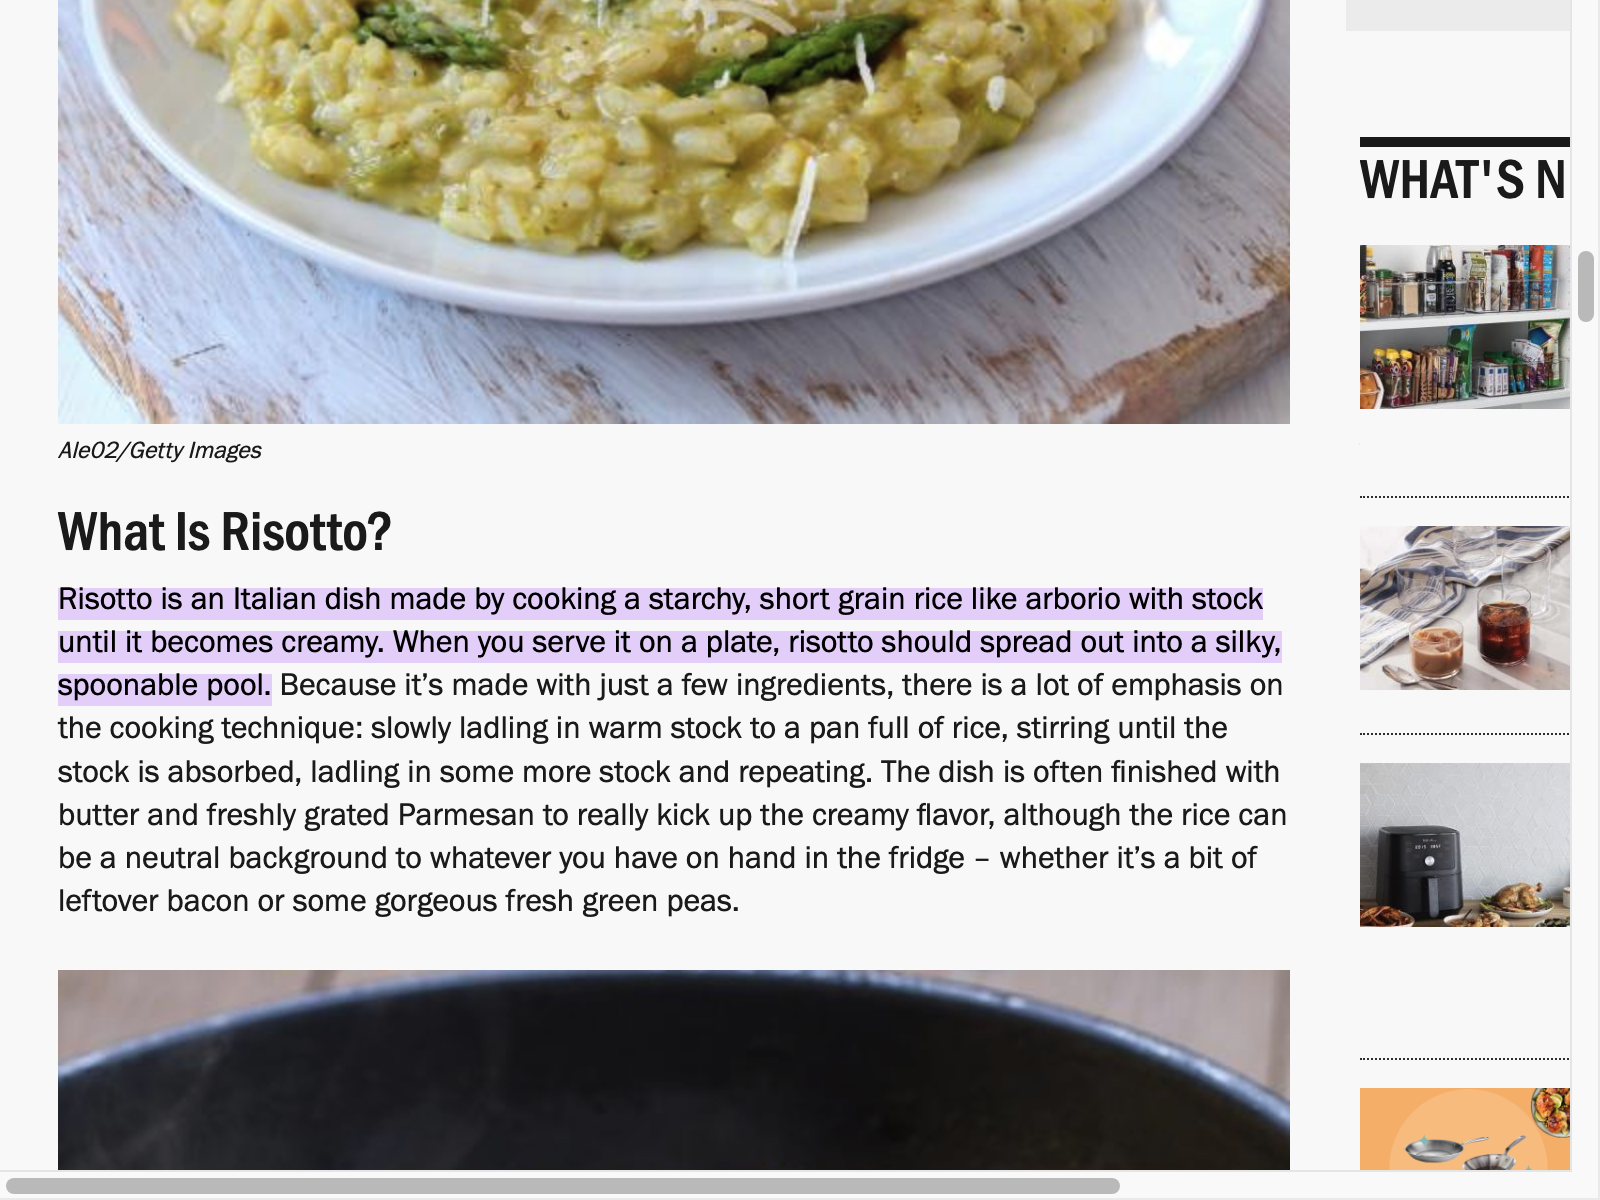 Risotto Review: Pros, Cons, Alternatives